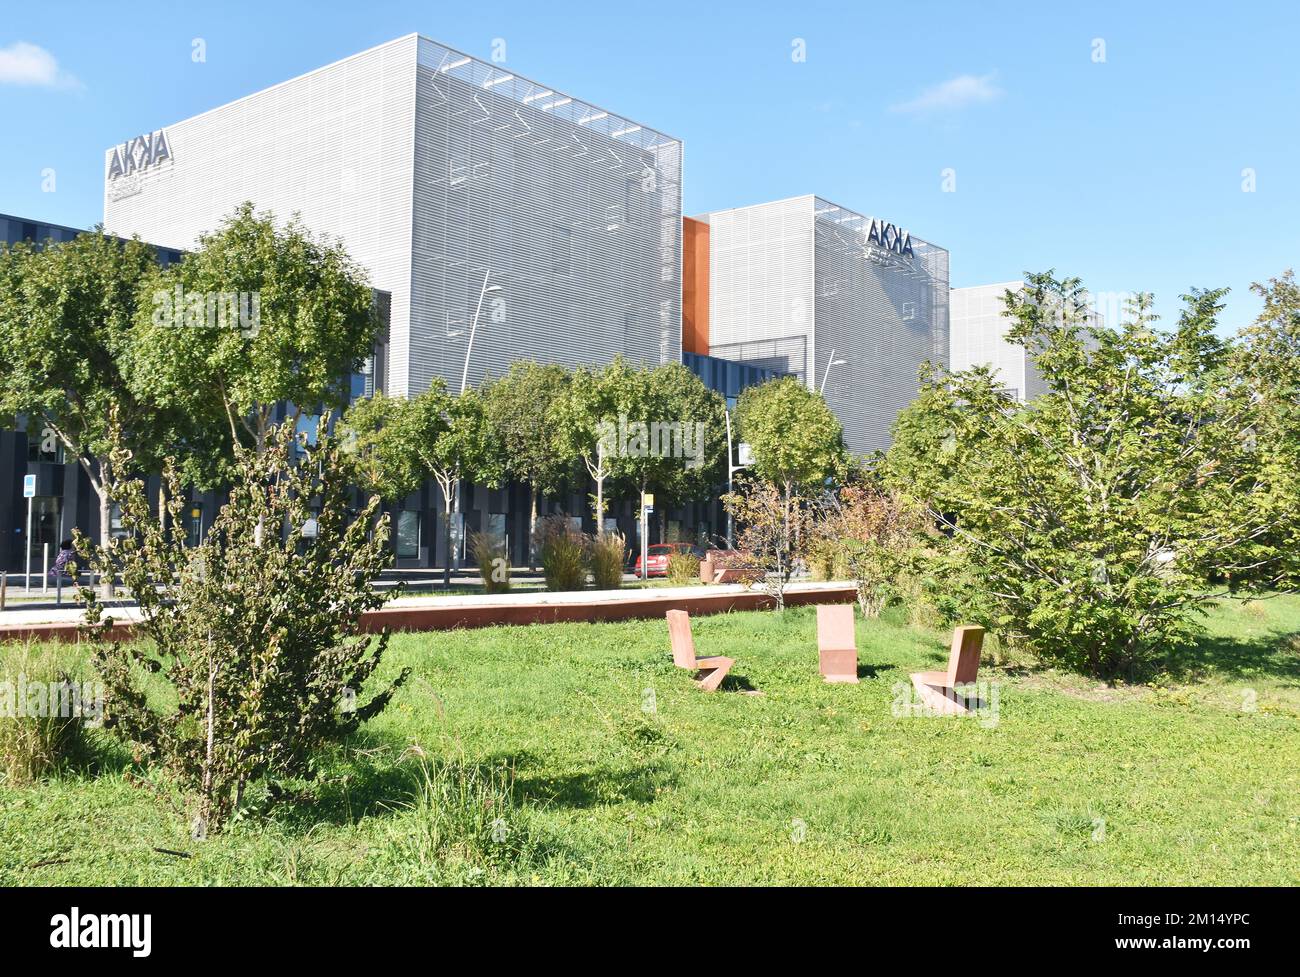 The Regional HQ building of AKKA Technologies at Blagnac, Toulouse, seen from the Parc de la ZAC Andromède, architect Hubert Godet Stock Photo